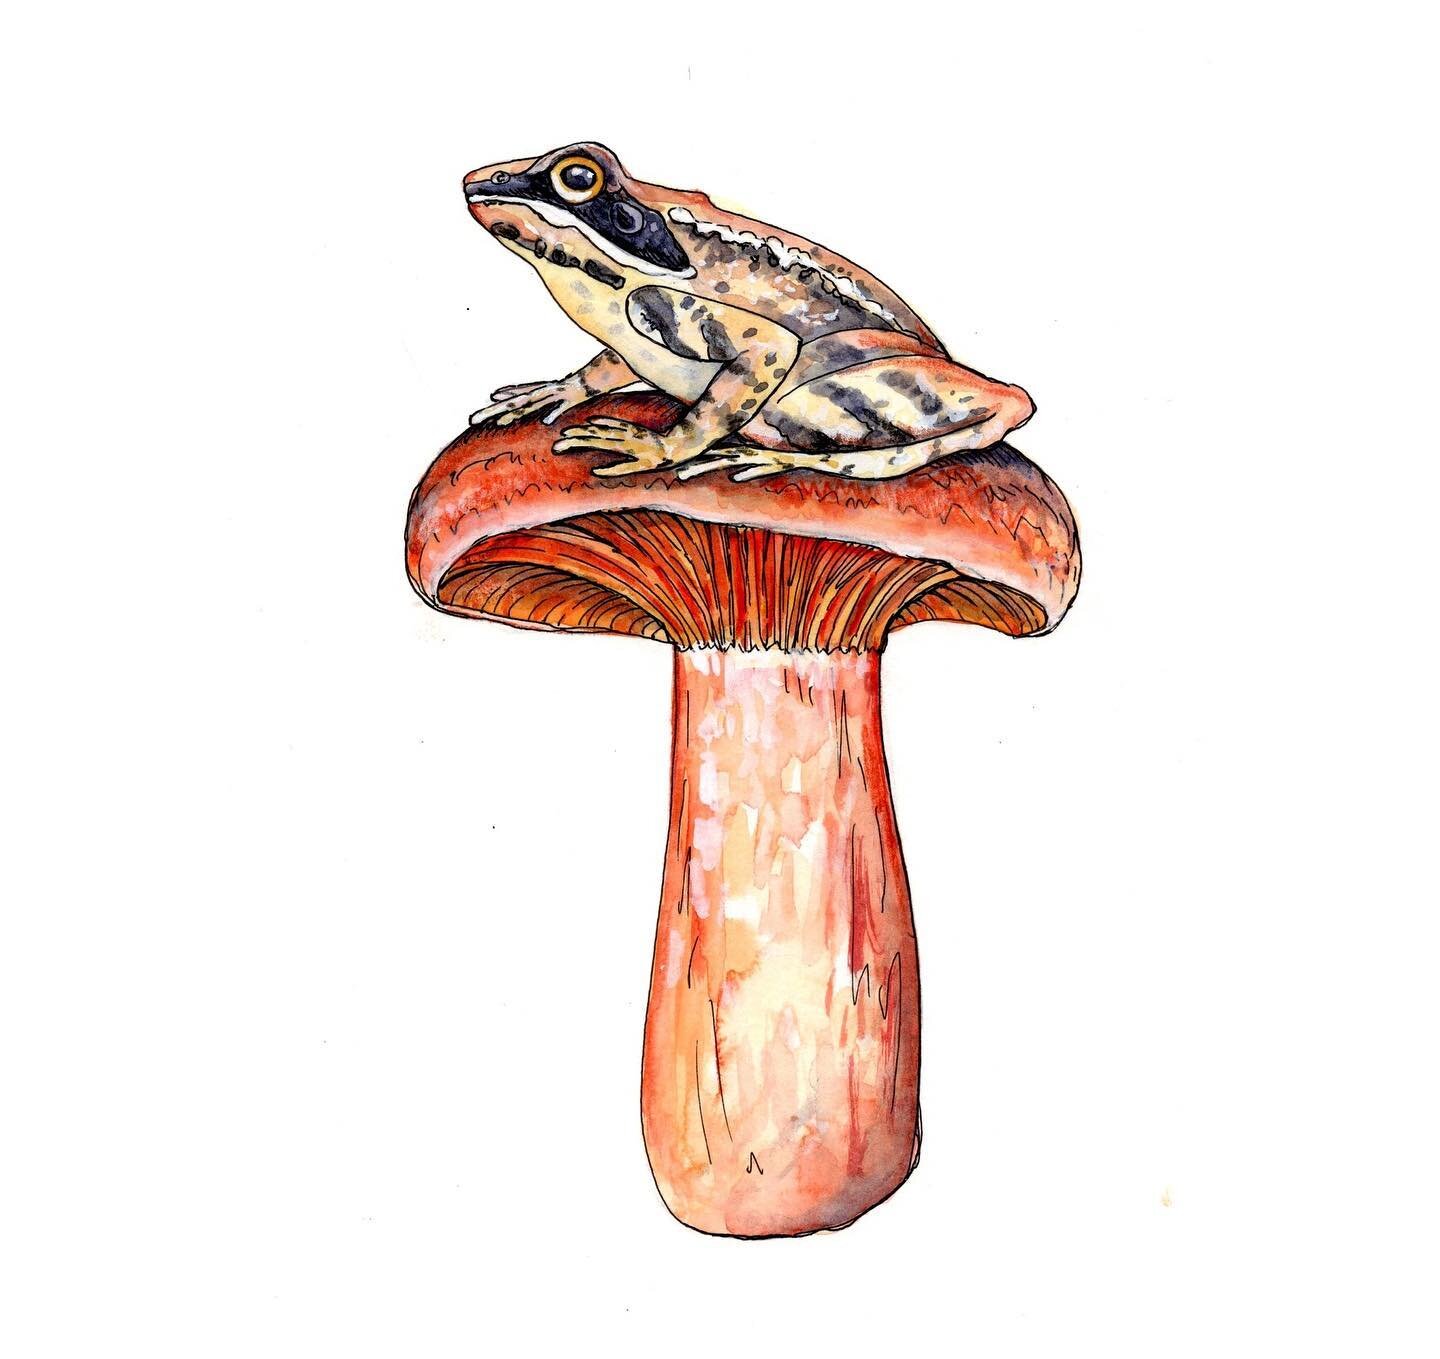 It was very fun to work on this illustration of a wood frog sitting on an orange delicious lactarius mushroom for a logo designed by @michellemcafeemuse for @woodfrogfarm. Wood Frog farm is a local organic farm at the end of the McCarthy Road. I alwa